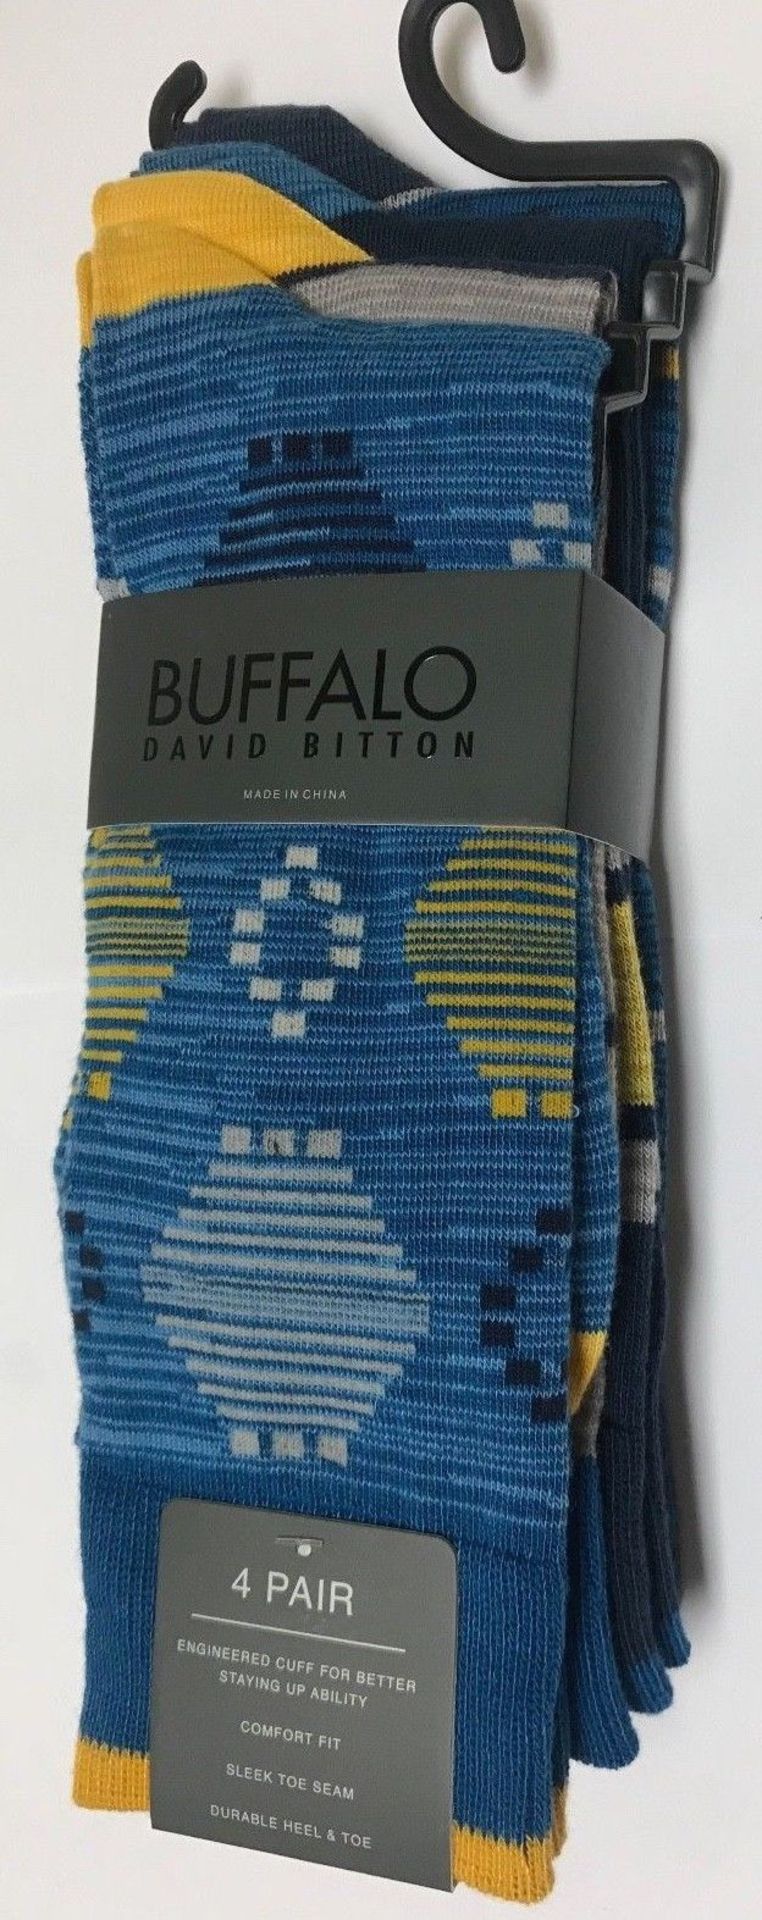 37 X 4 PACKS OF BUFFALO DAVID BITTON CREW SOCKS THESE SOCKS SELL AT THE BUFFALO STORES FOR $29.95